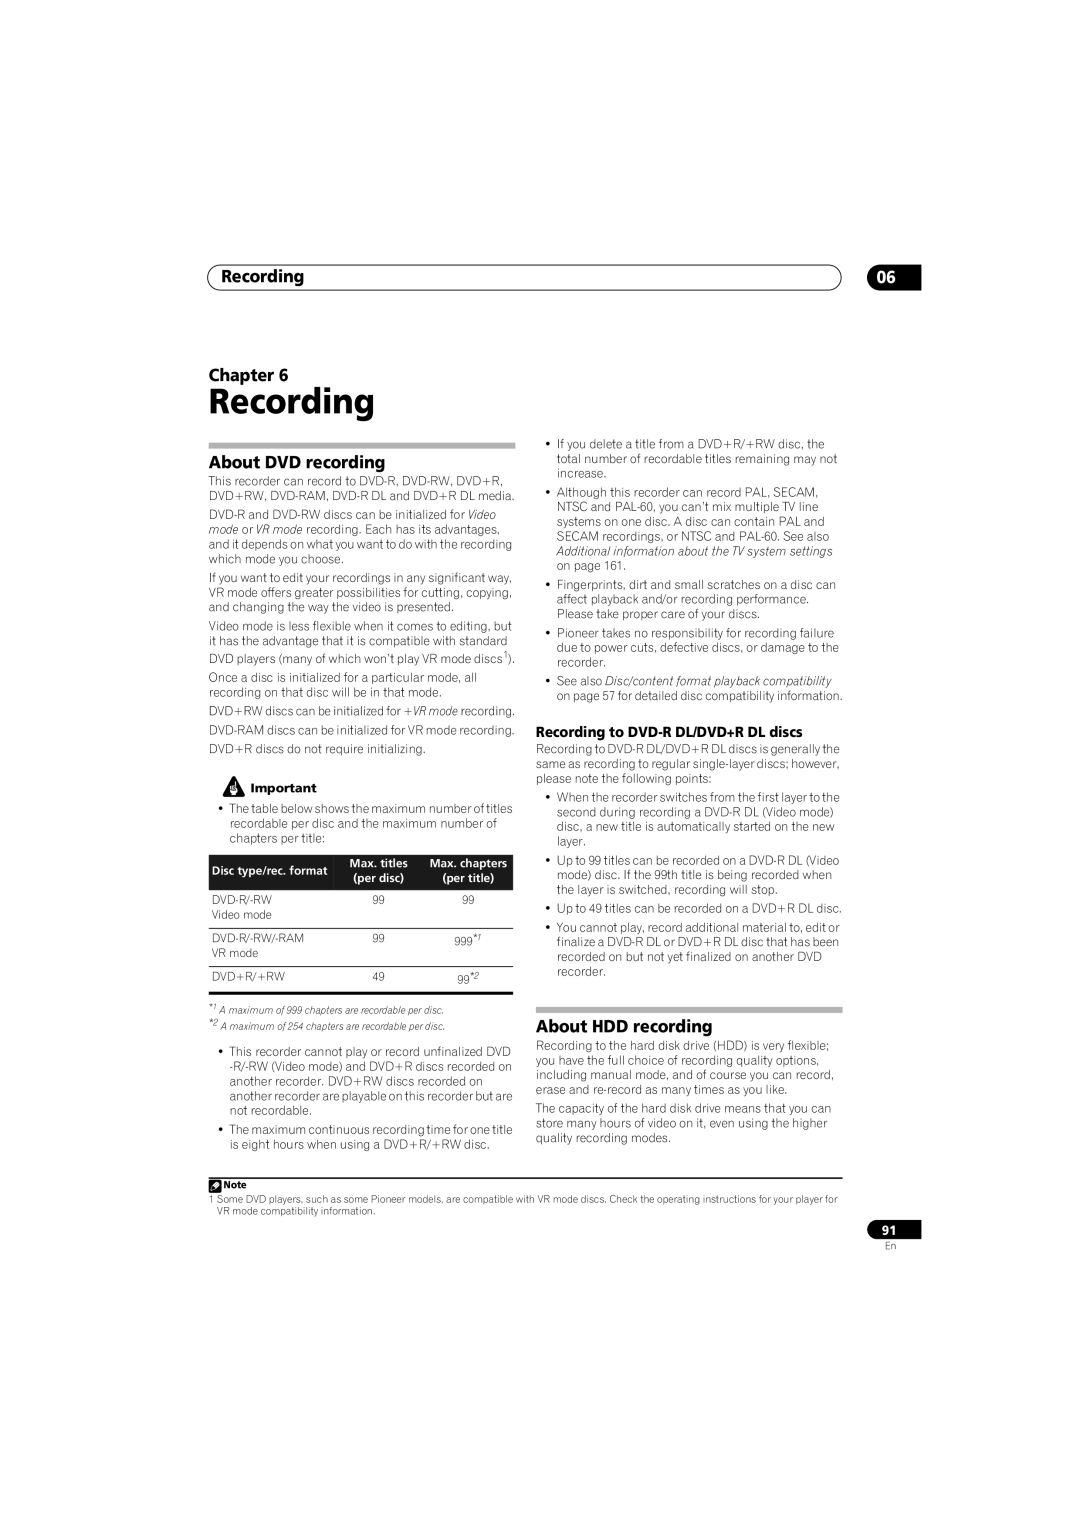 Pioneer SX-LX70SW Recording Chapter, About DVD recording, About HDD recording, Recording to DVD-RDL/DVD+R DL discs 